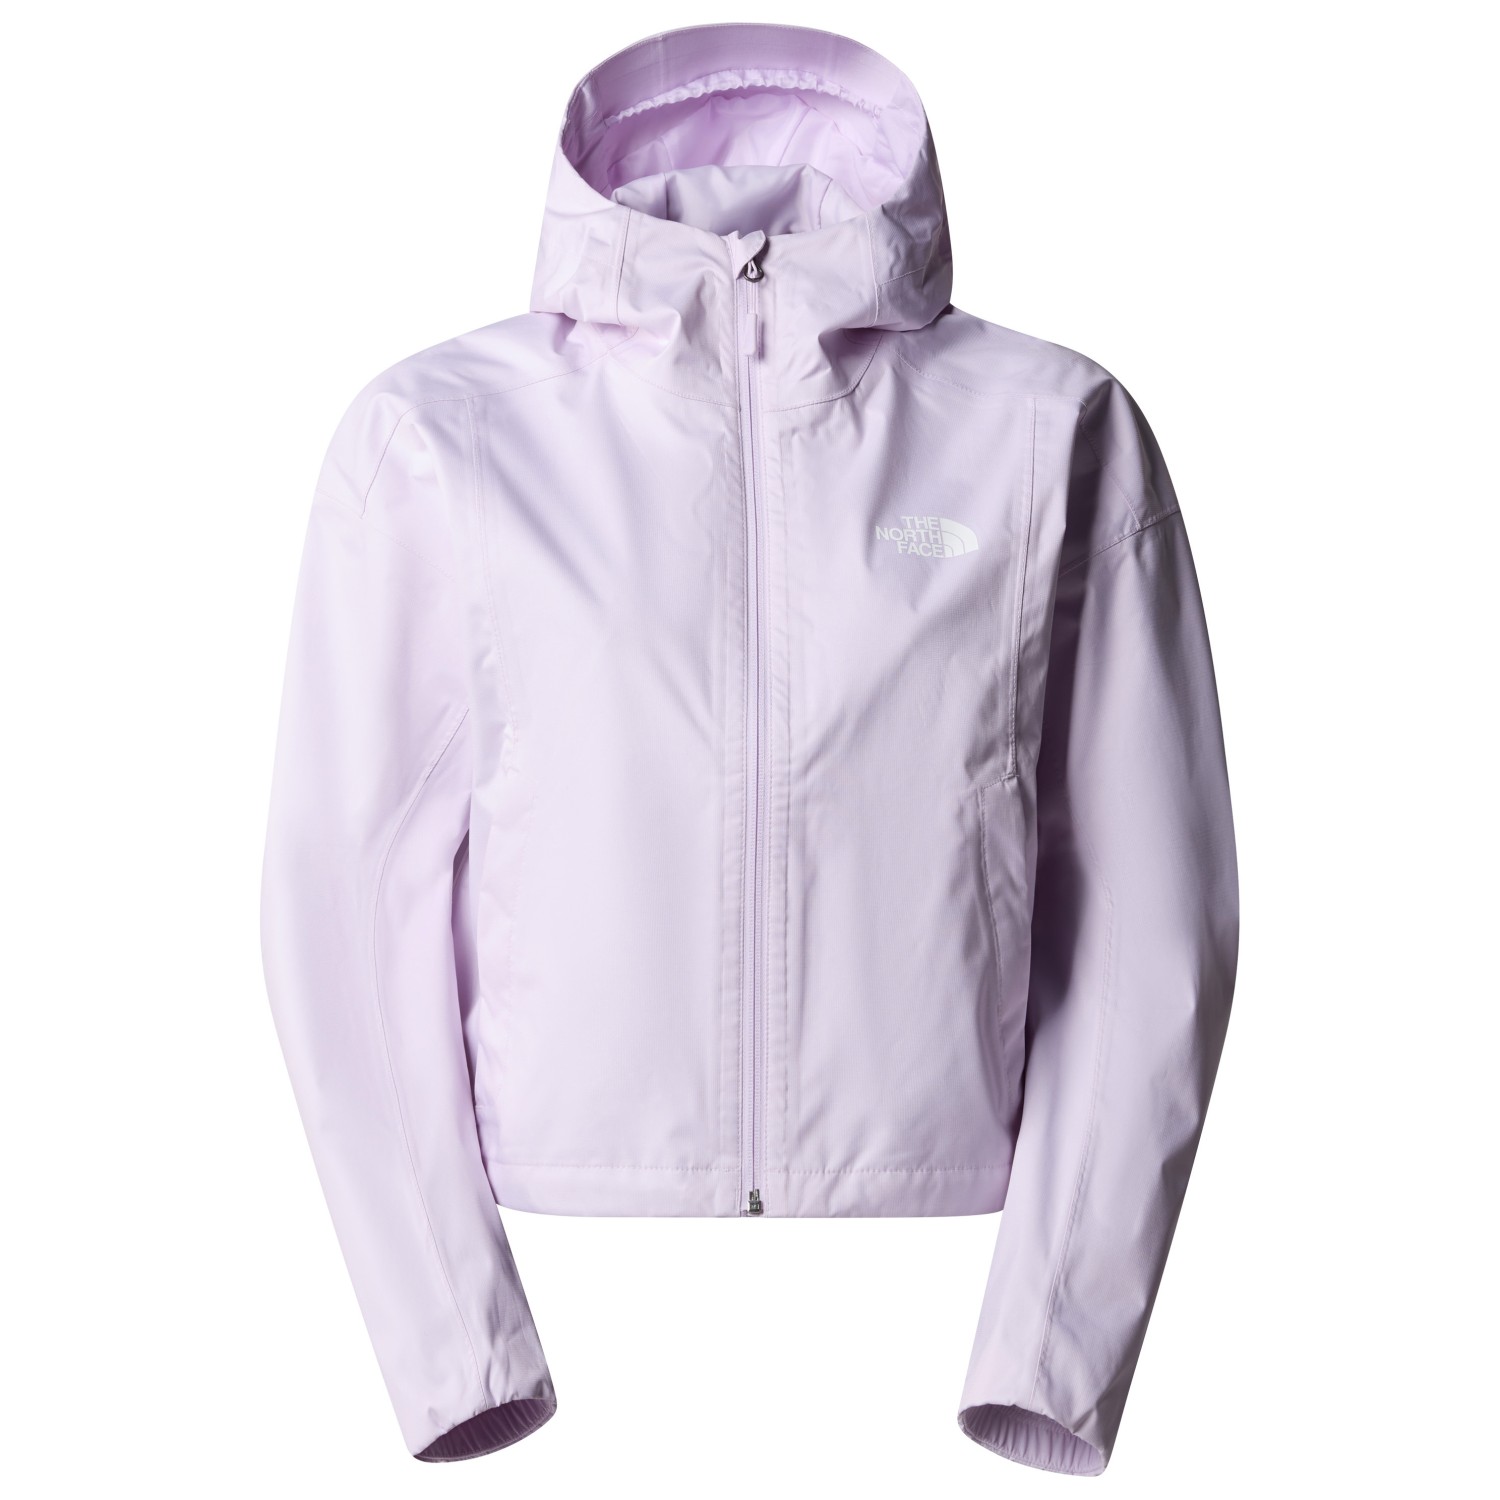 Дождевик The North Face Women's Cropped Quest, цвет Icy Lilac куртка the north face cropped quest светло оранжевый